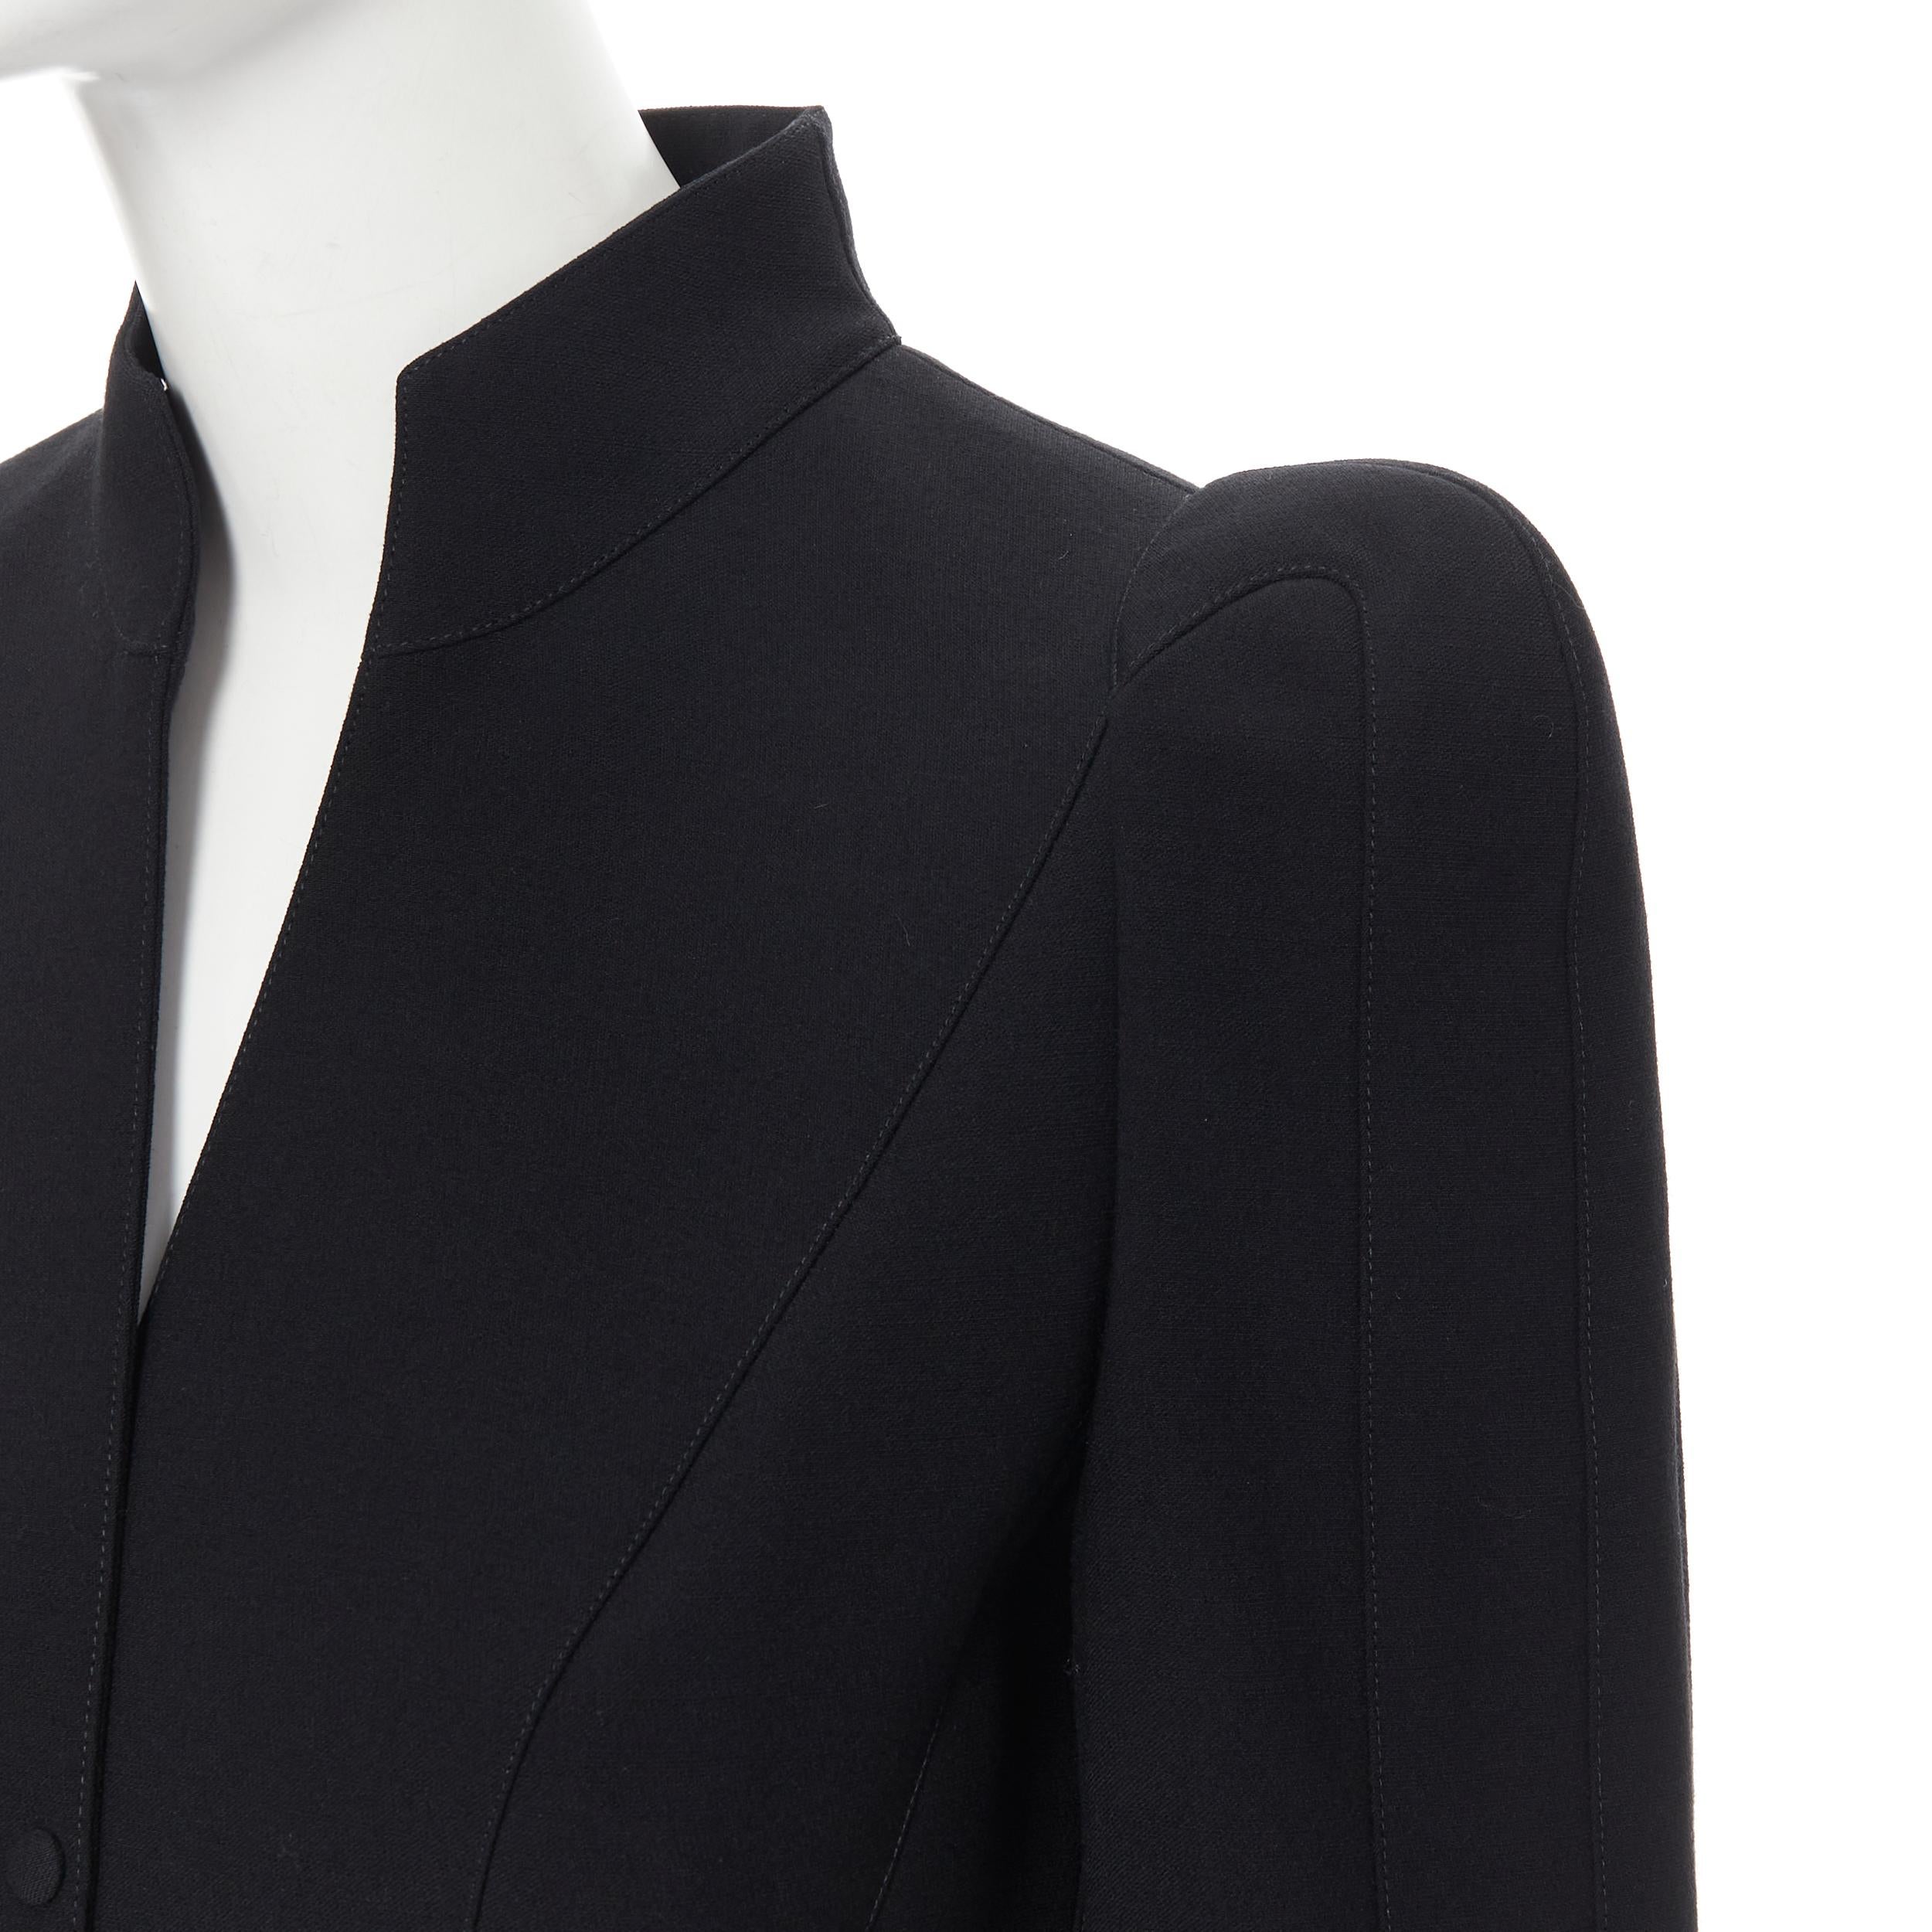 THIERRY MUGLER black wool peak shoulder fitted peplum blazer jacket FR38 S 
Reference: GIYG/A00053 
Brand: Thierry Mugler 
Designer: Thierry Mugler 
Material: Wool 
Color: Black 
Pattern: Solid 
Closure: Button 
Extra Detail: This blazer comes with